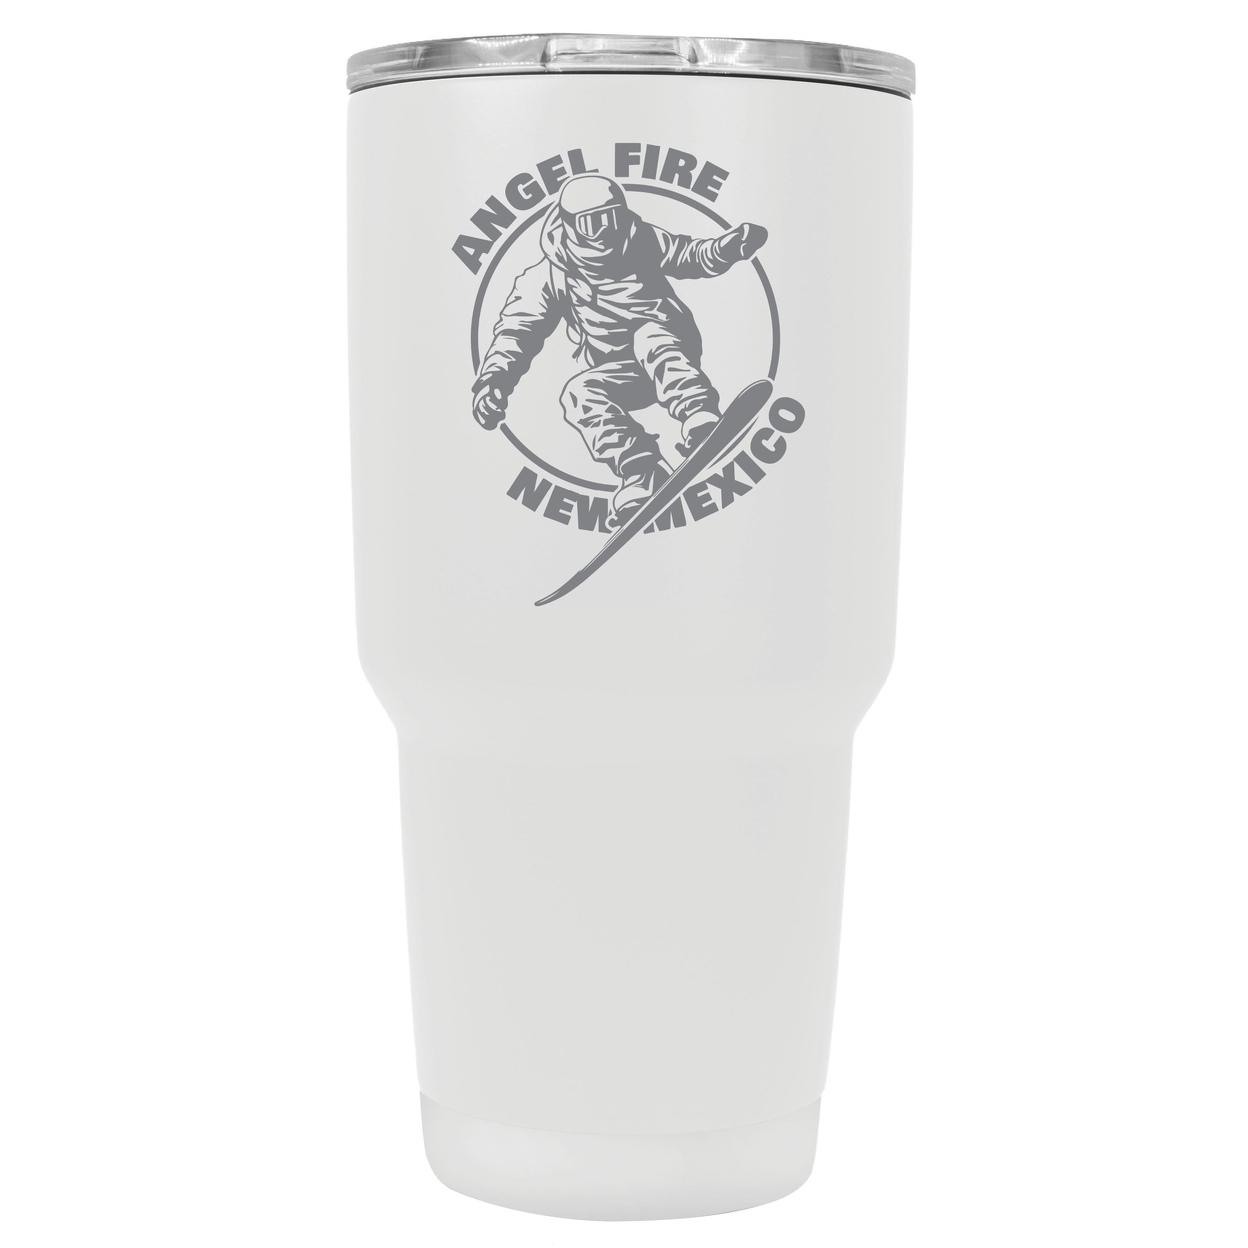 Angel Fire New Mexico Souvenir 24 Oz Engraved Insulated Stainless Steel Tumbler - Rose Gold,,4-Pack